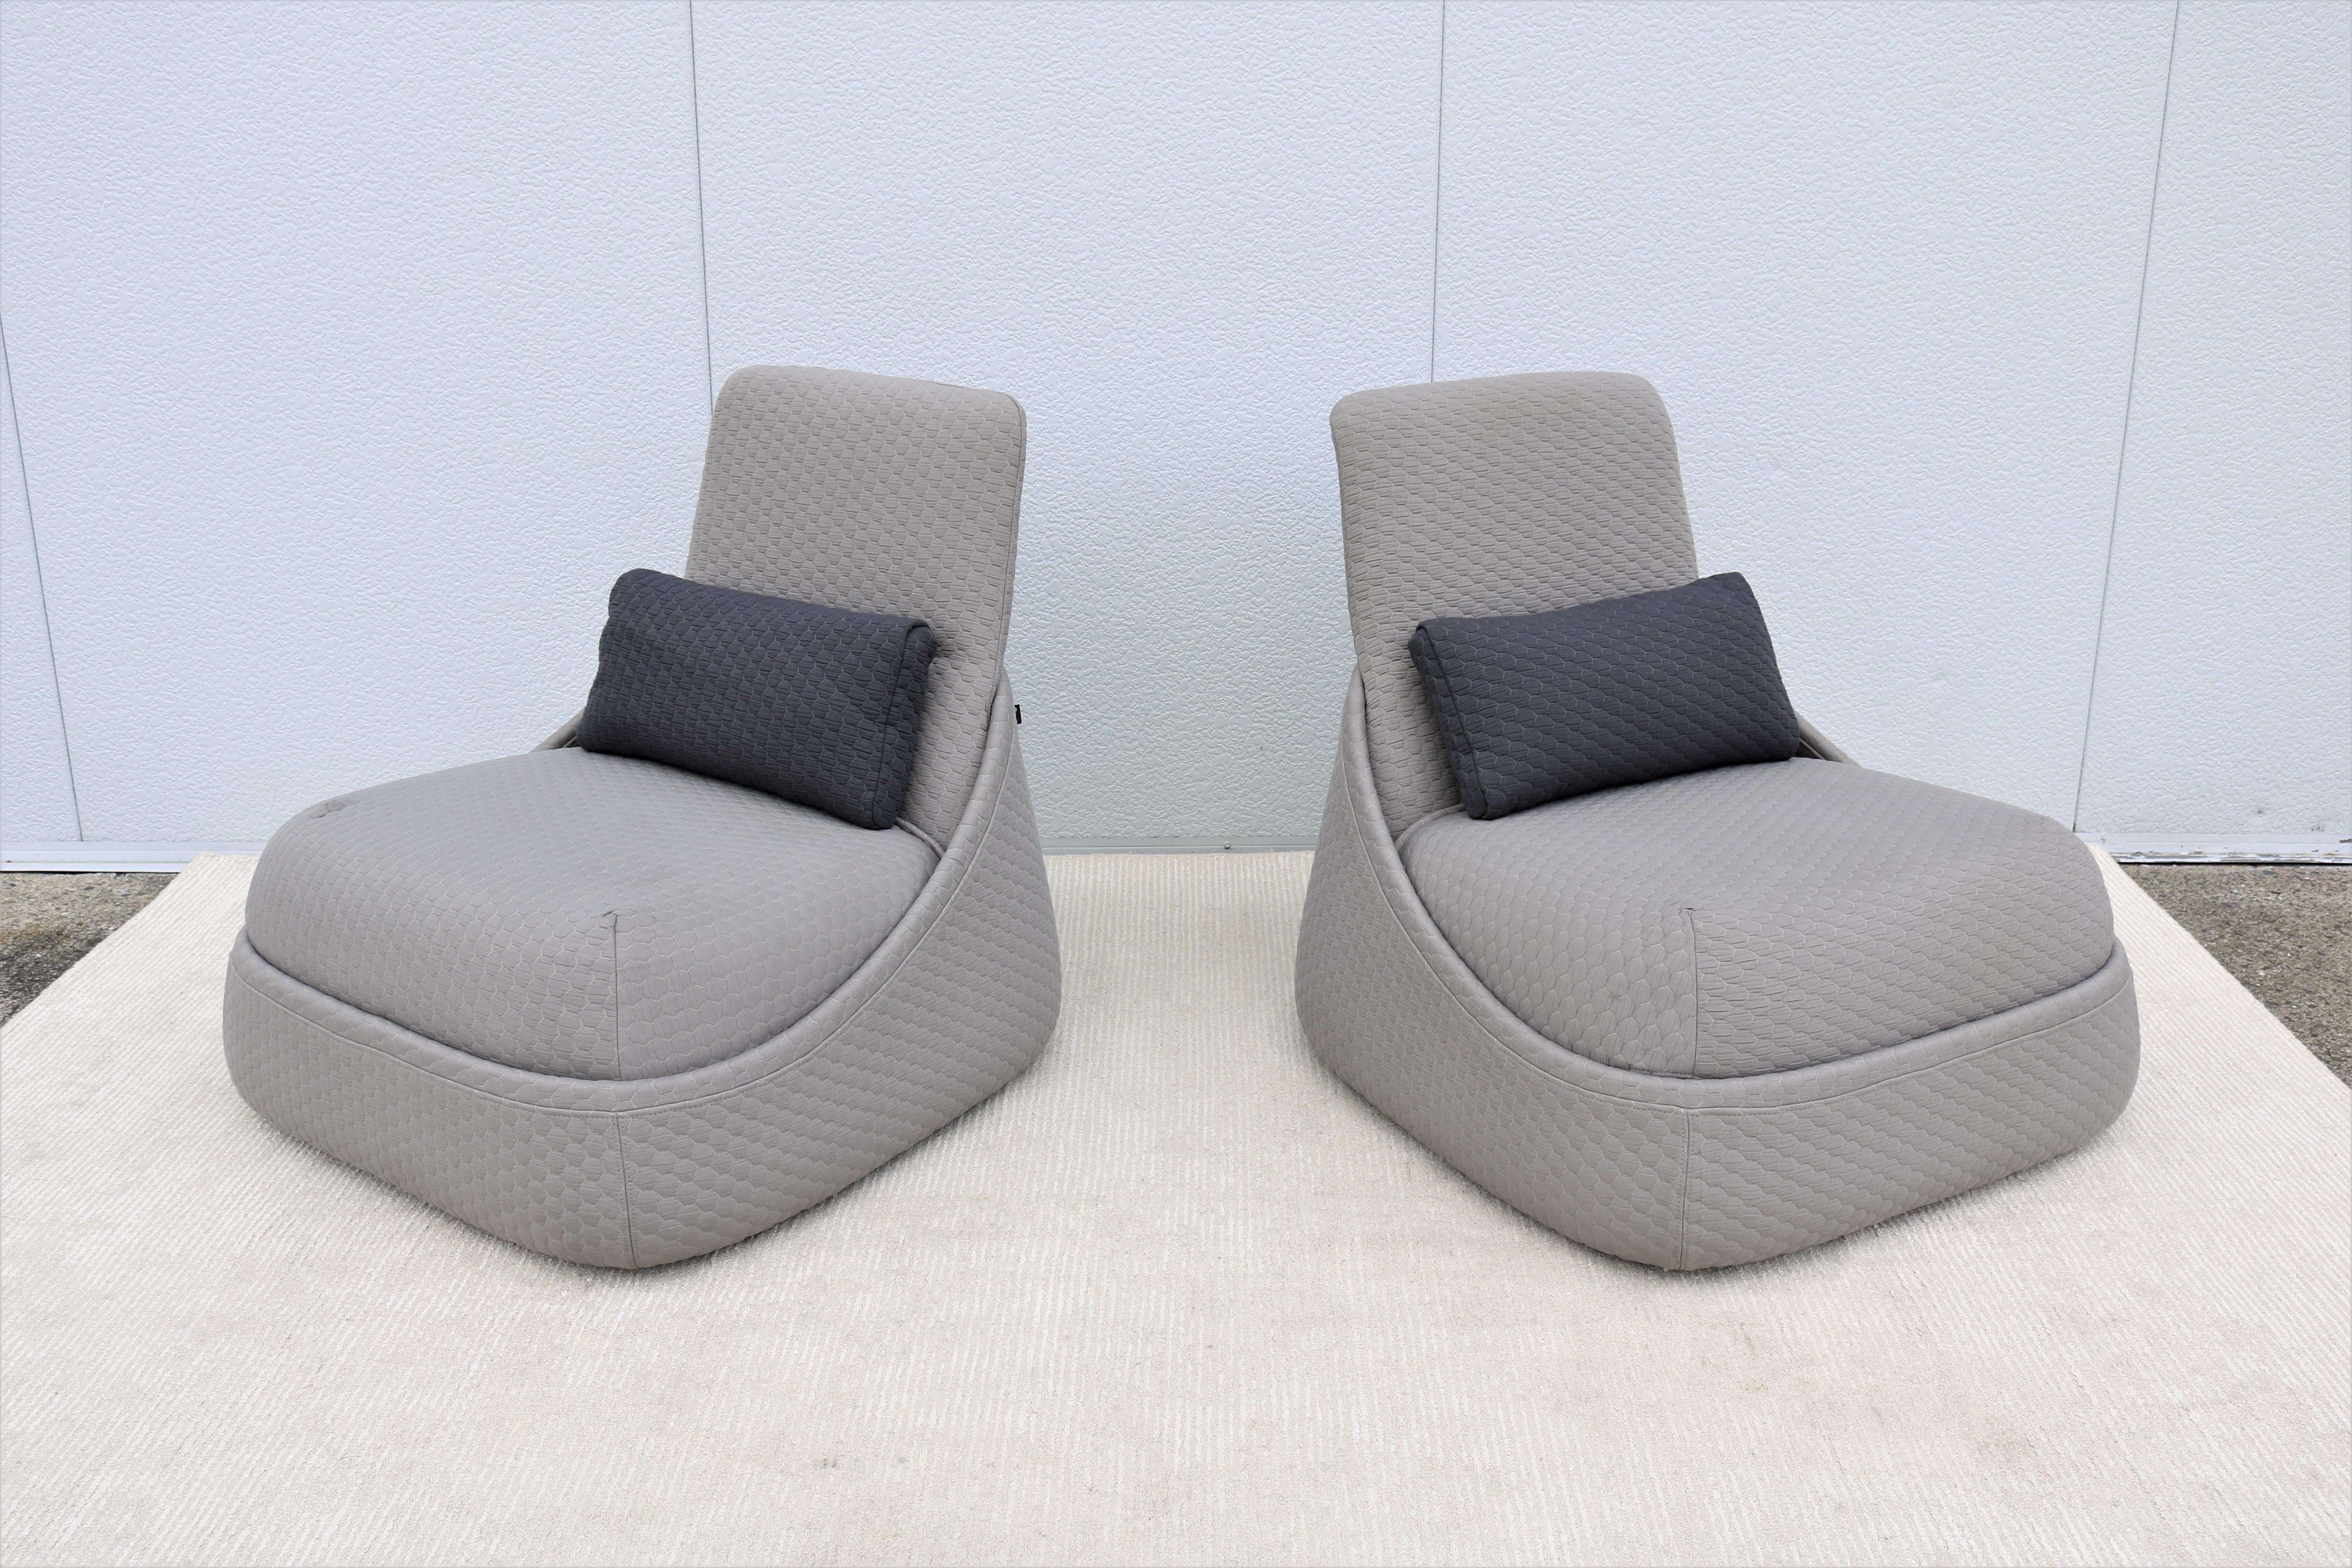 Modern Patricia Urquiola for Coalesse Hosu Lounge Chairs with Ottoman, a Pair In Excellent Condition For Sale In Secaucus, NJ